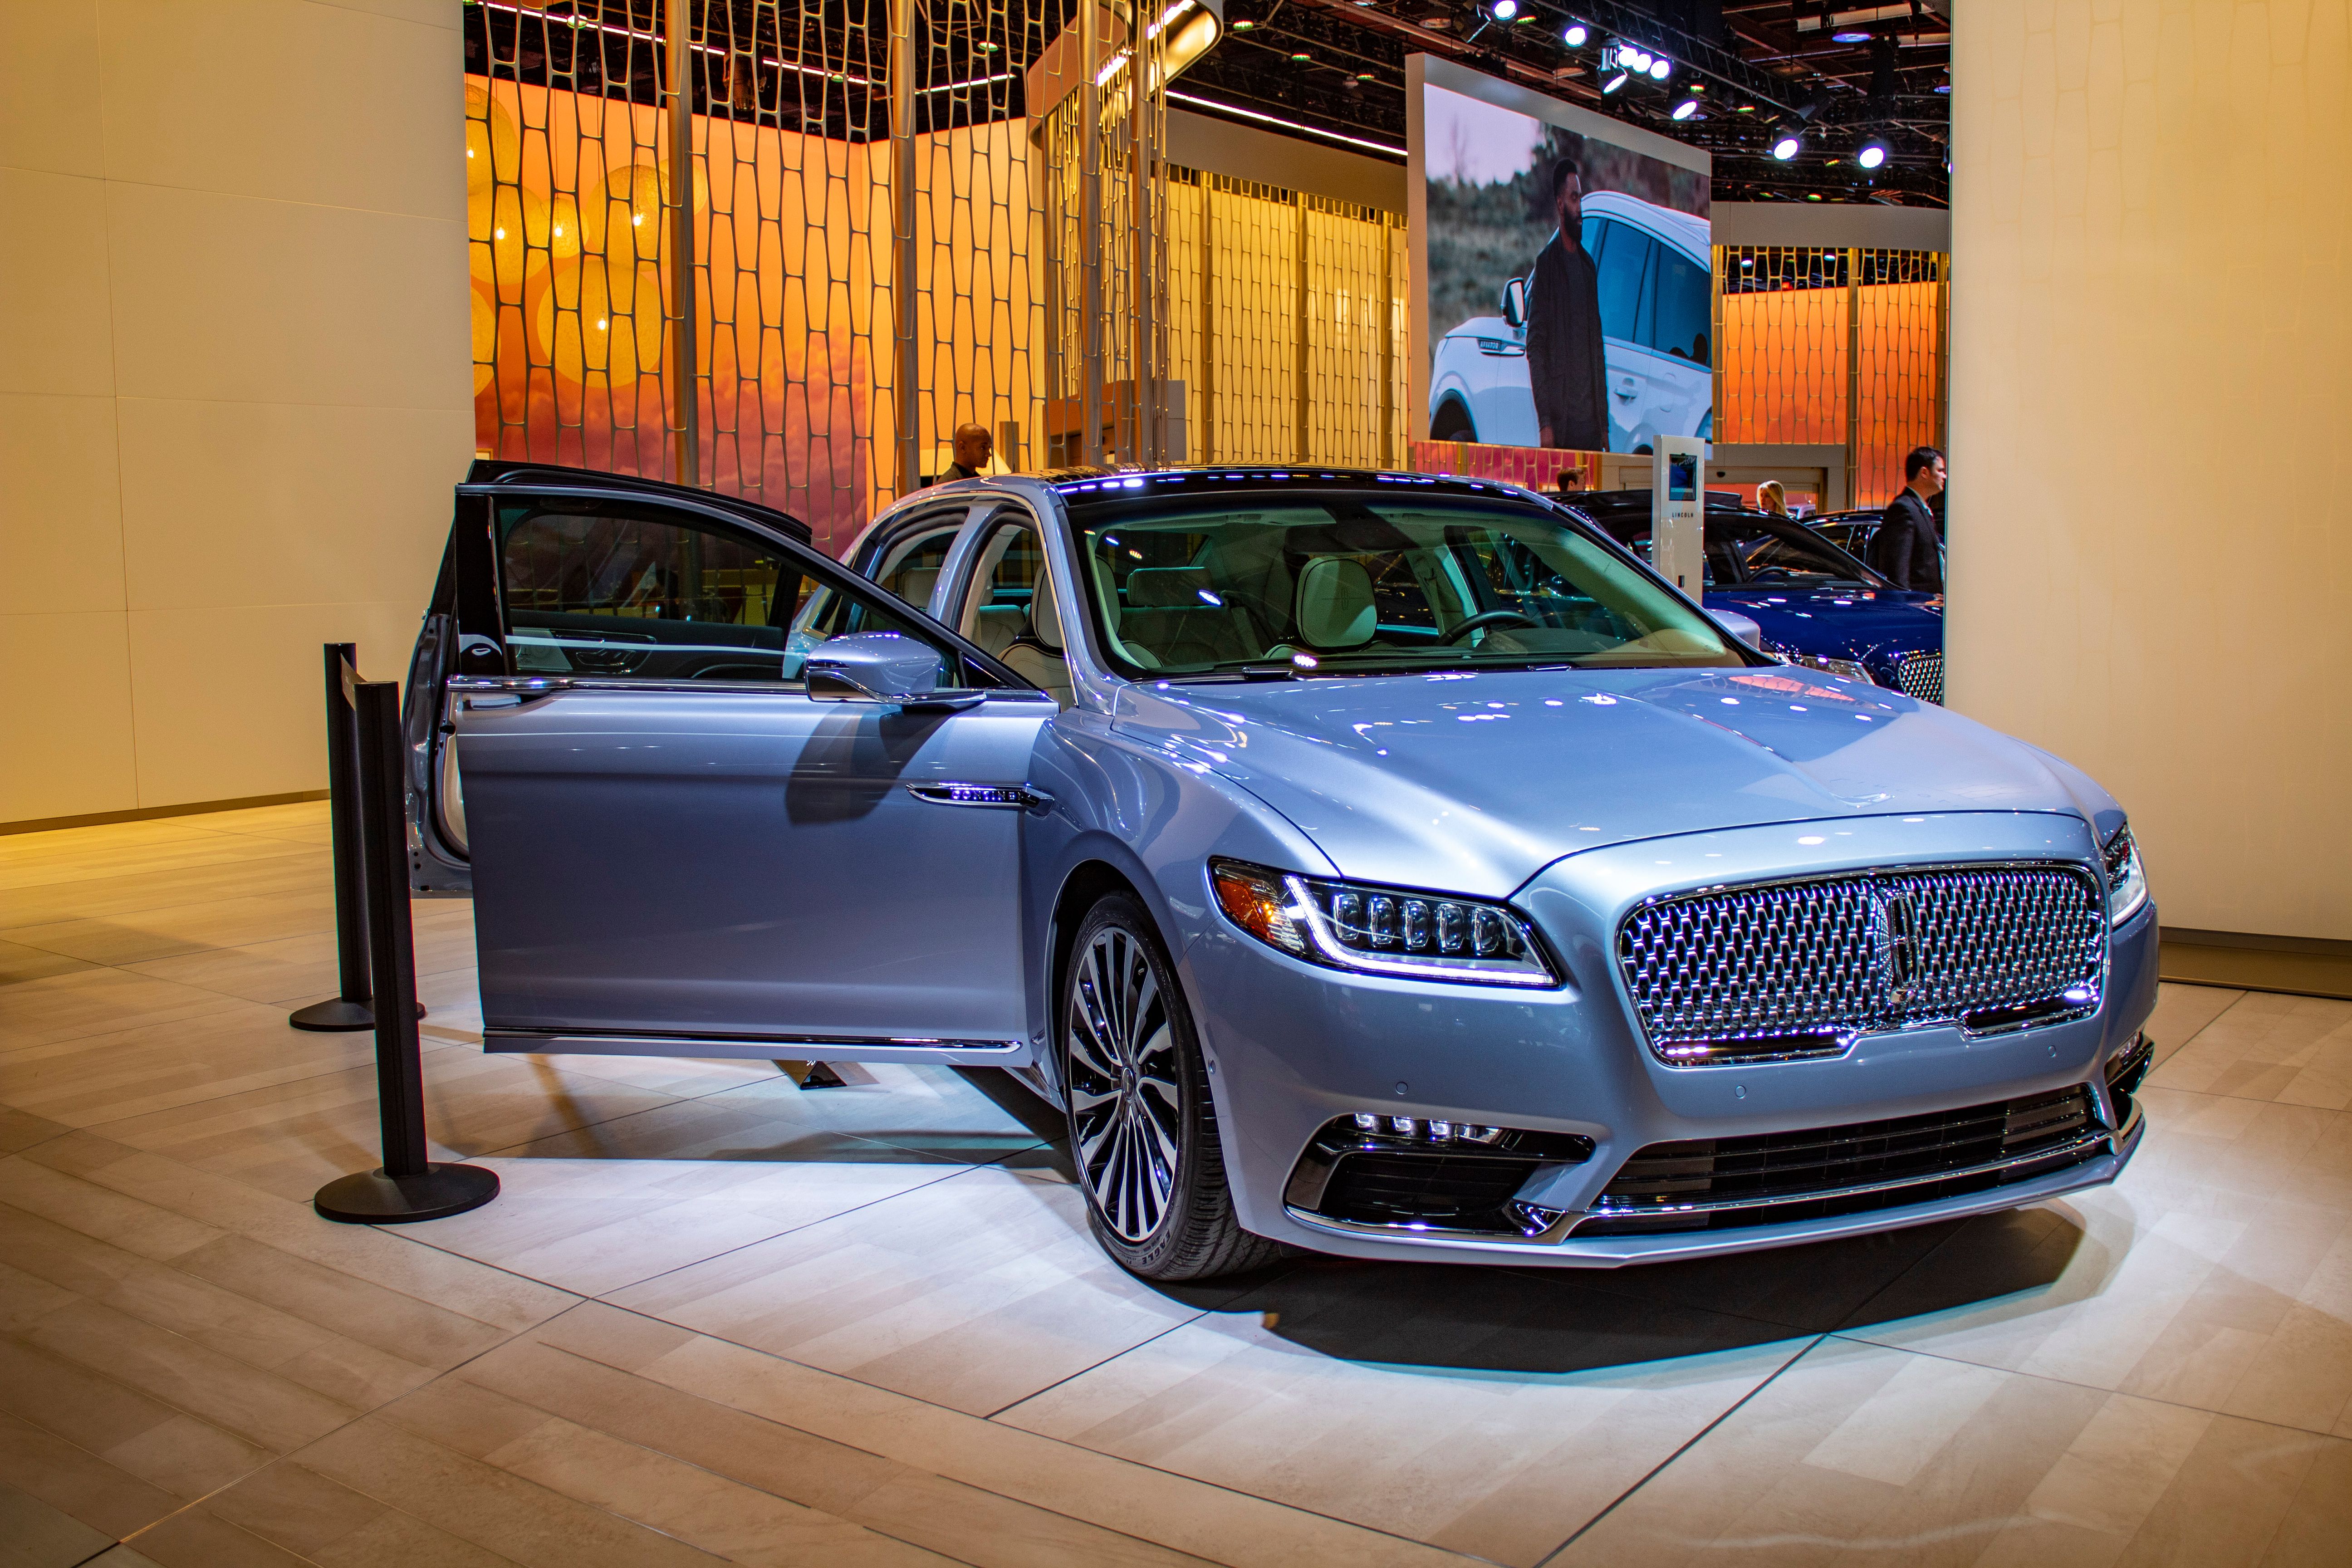 2019 The 2019 Lincoln Continental Coach Door Edition Has Sold Out but It's Not Over Yet